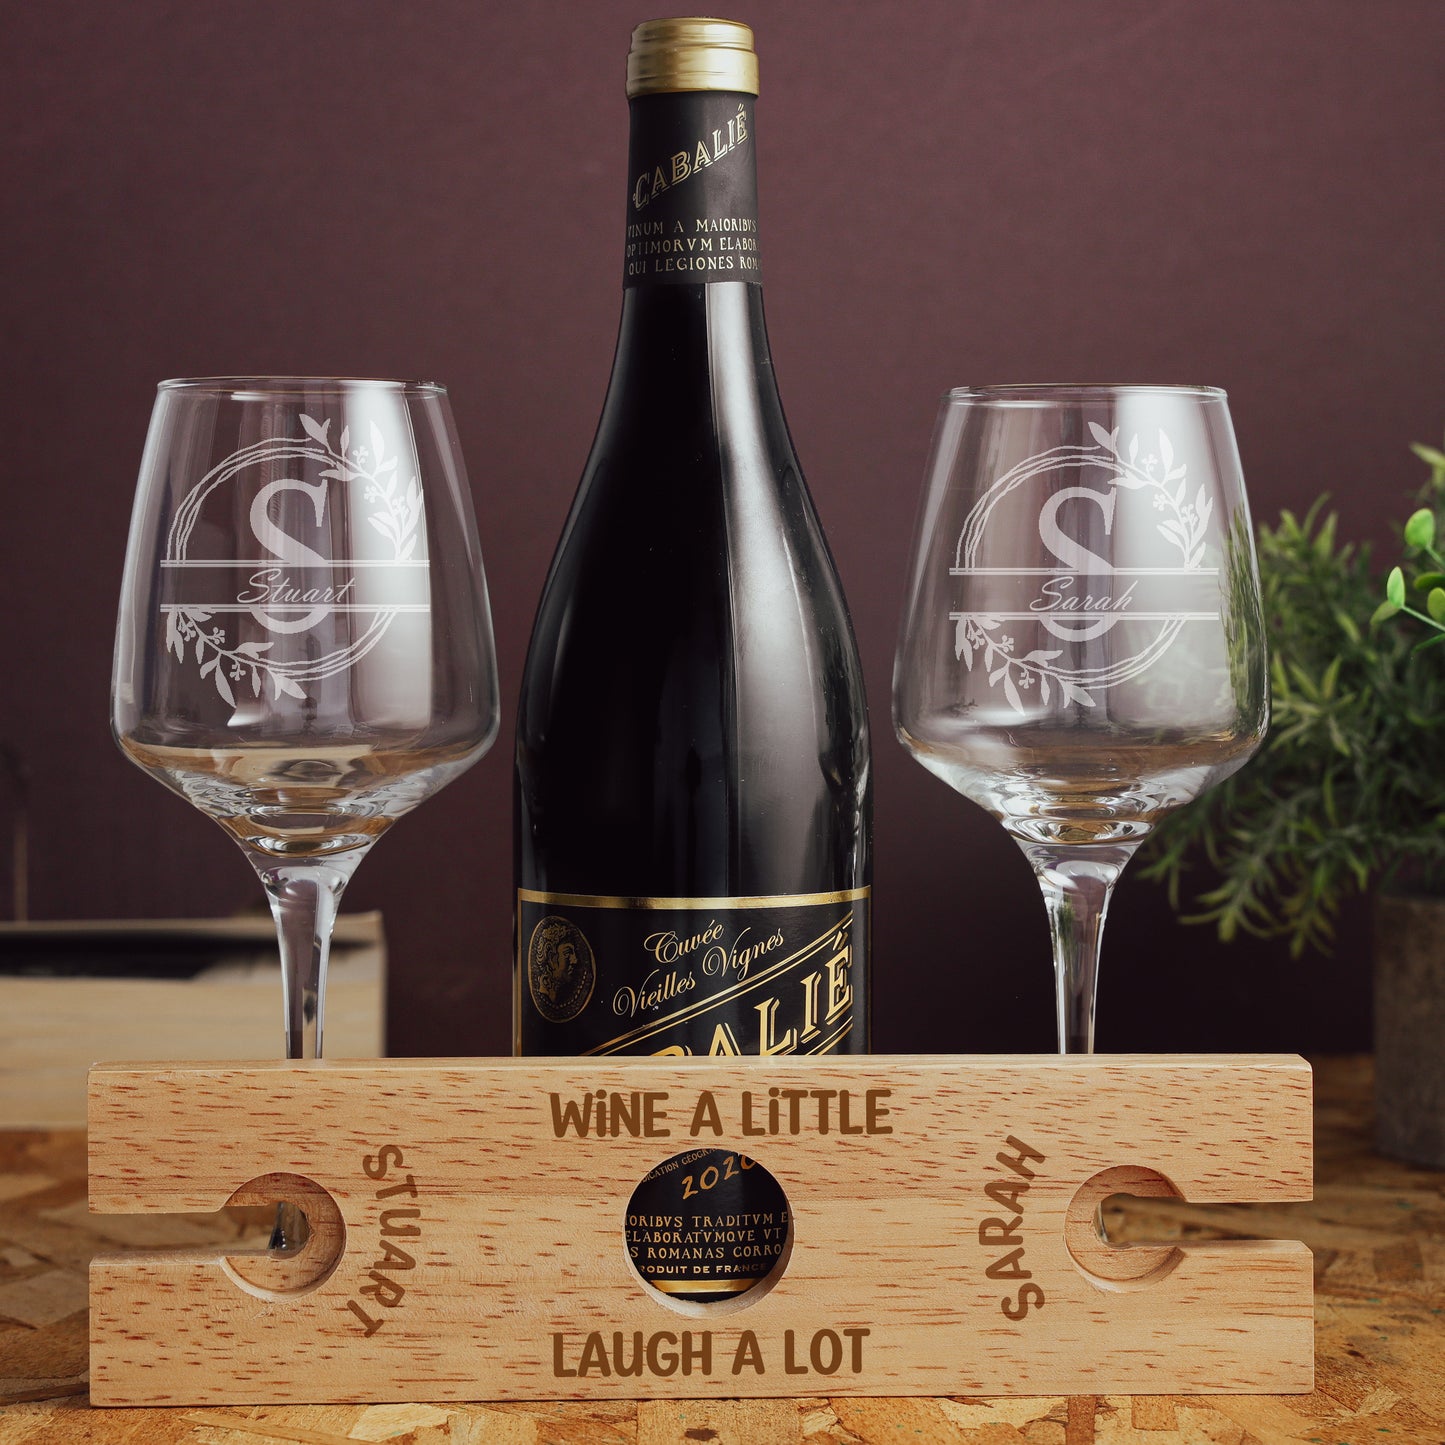 Engraved Personalised "Wine A Little, Laugh A Lot" Wooden 2 Wine Glass Butler Caddy  - Always Looking Good -   